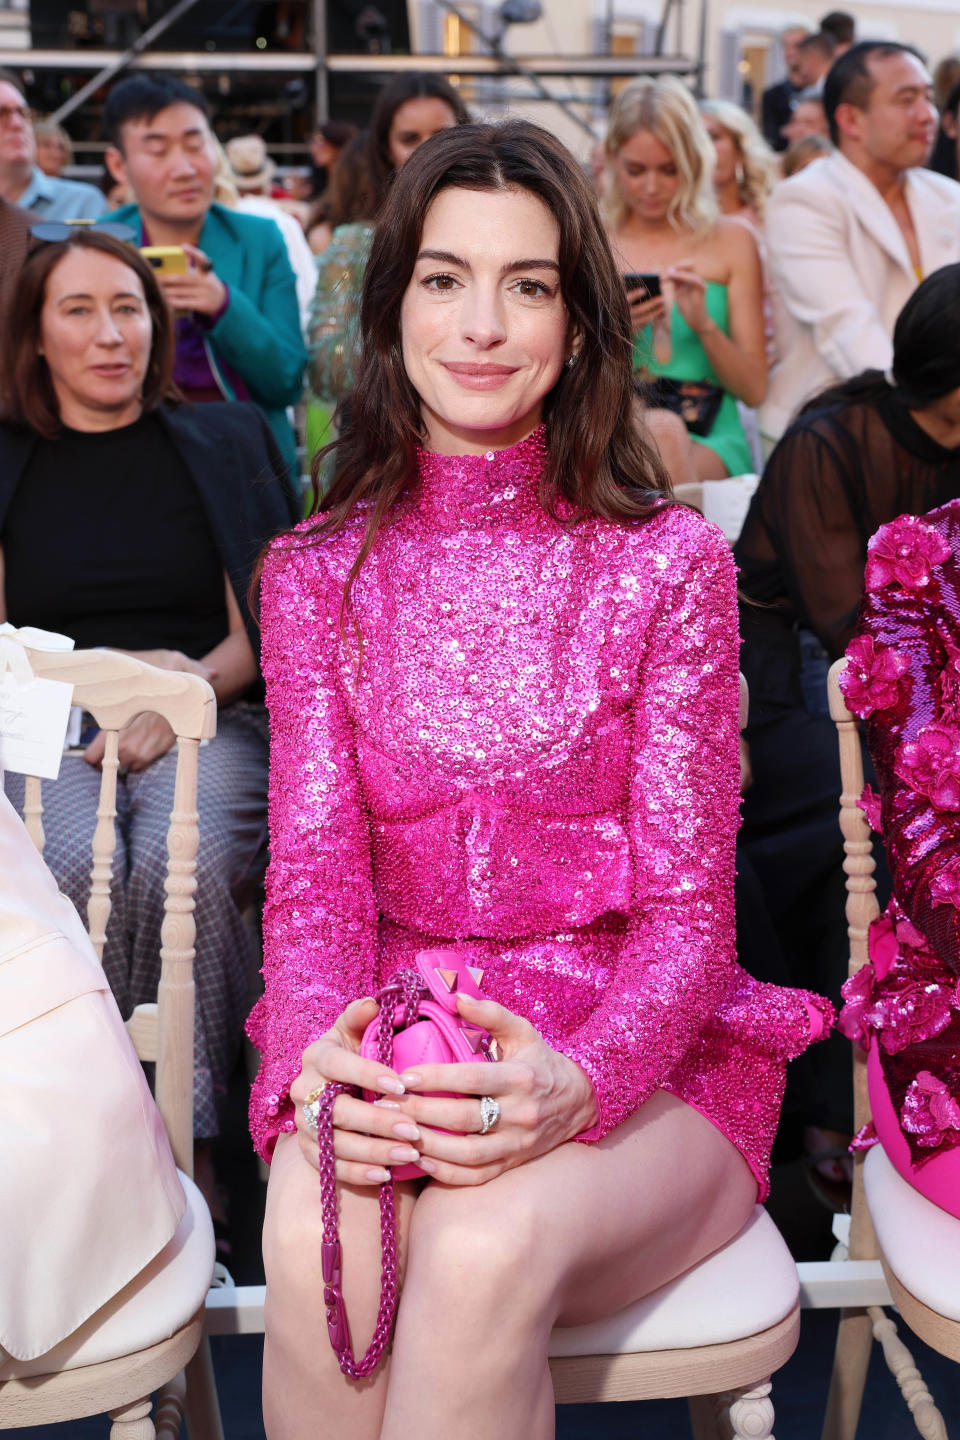 Anne Hathaway sitting front row at a fashion show in a short sequined dress